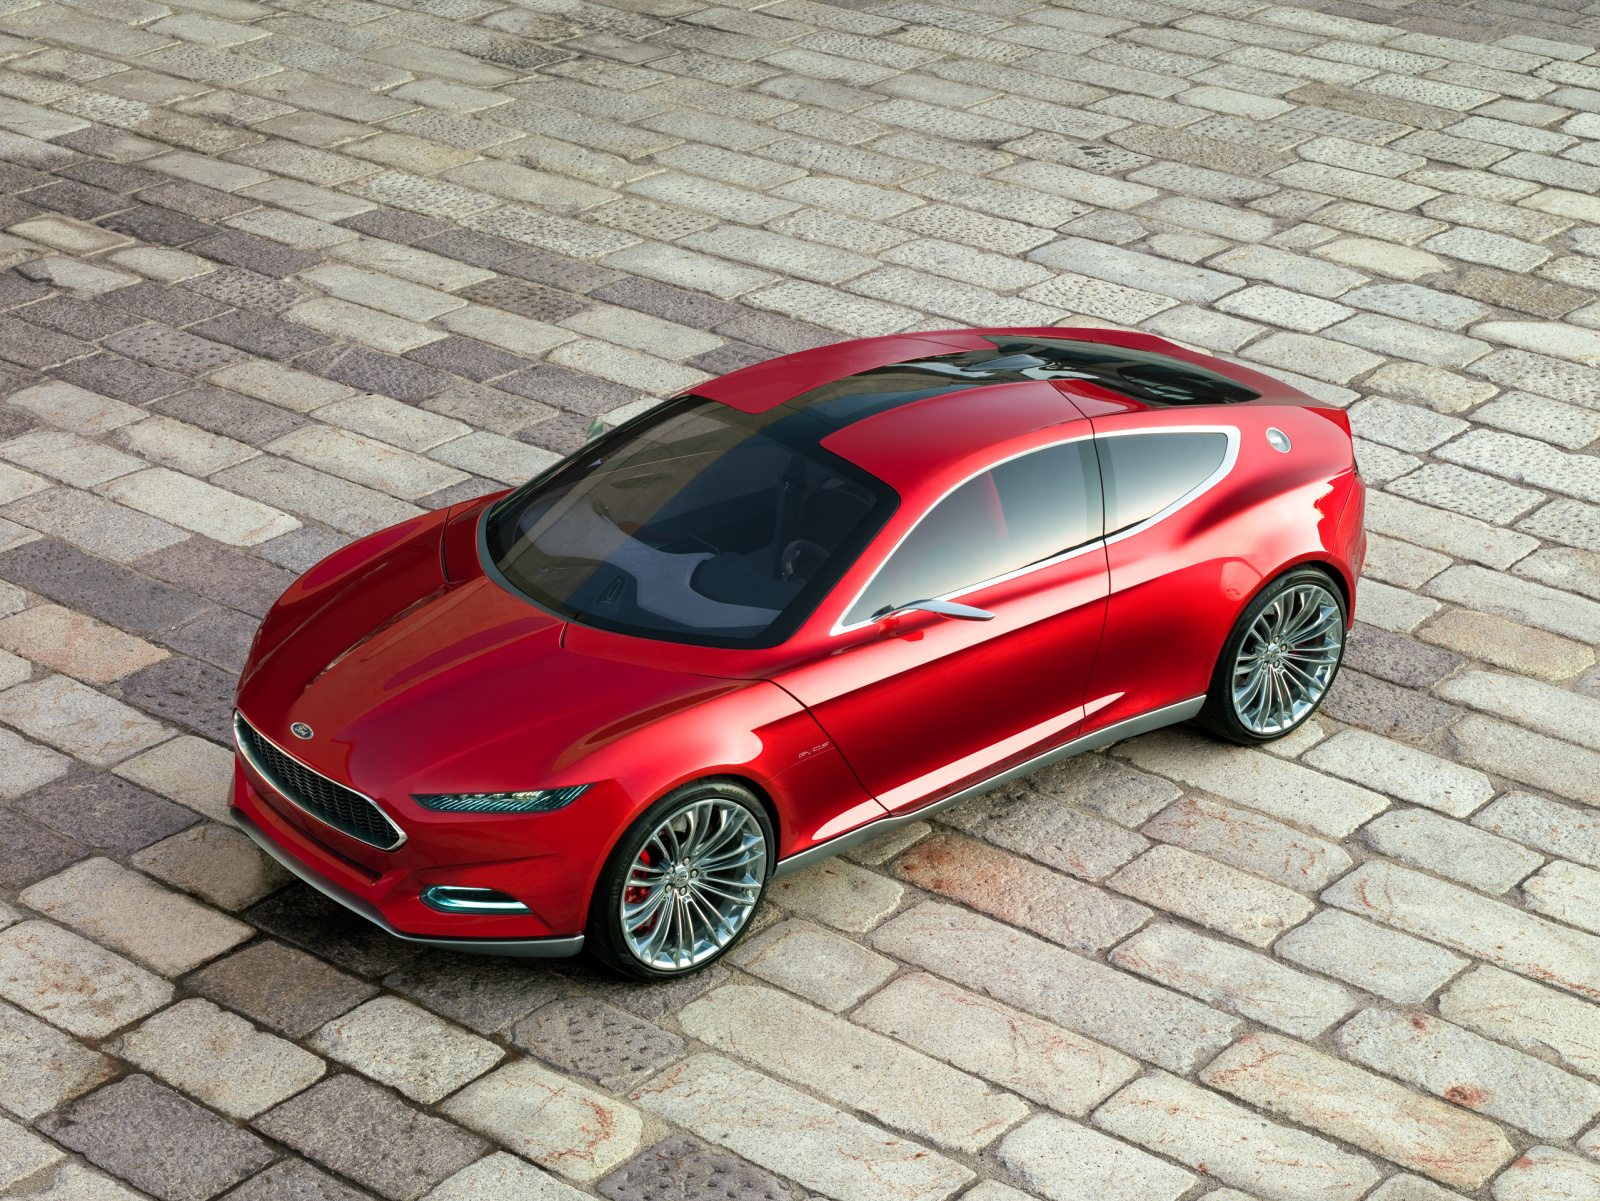 Ford Evos Concept - Foto eines Ford Concept-Cars